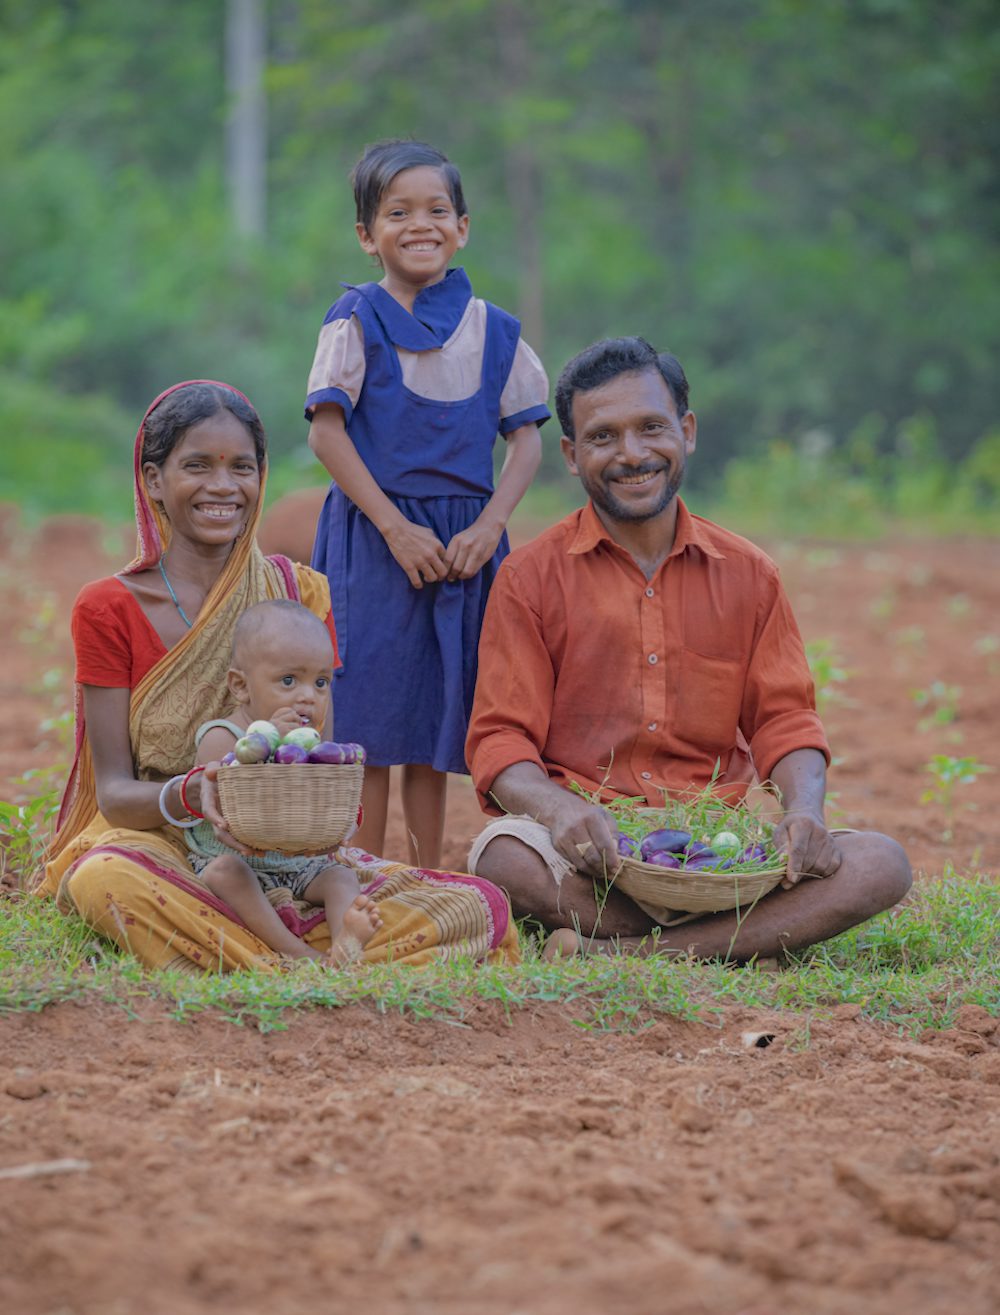 A mother, father and two young children sit together in a field in India.